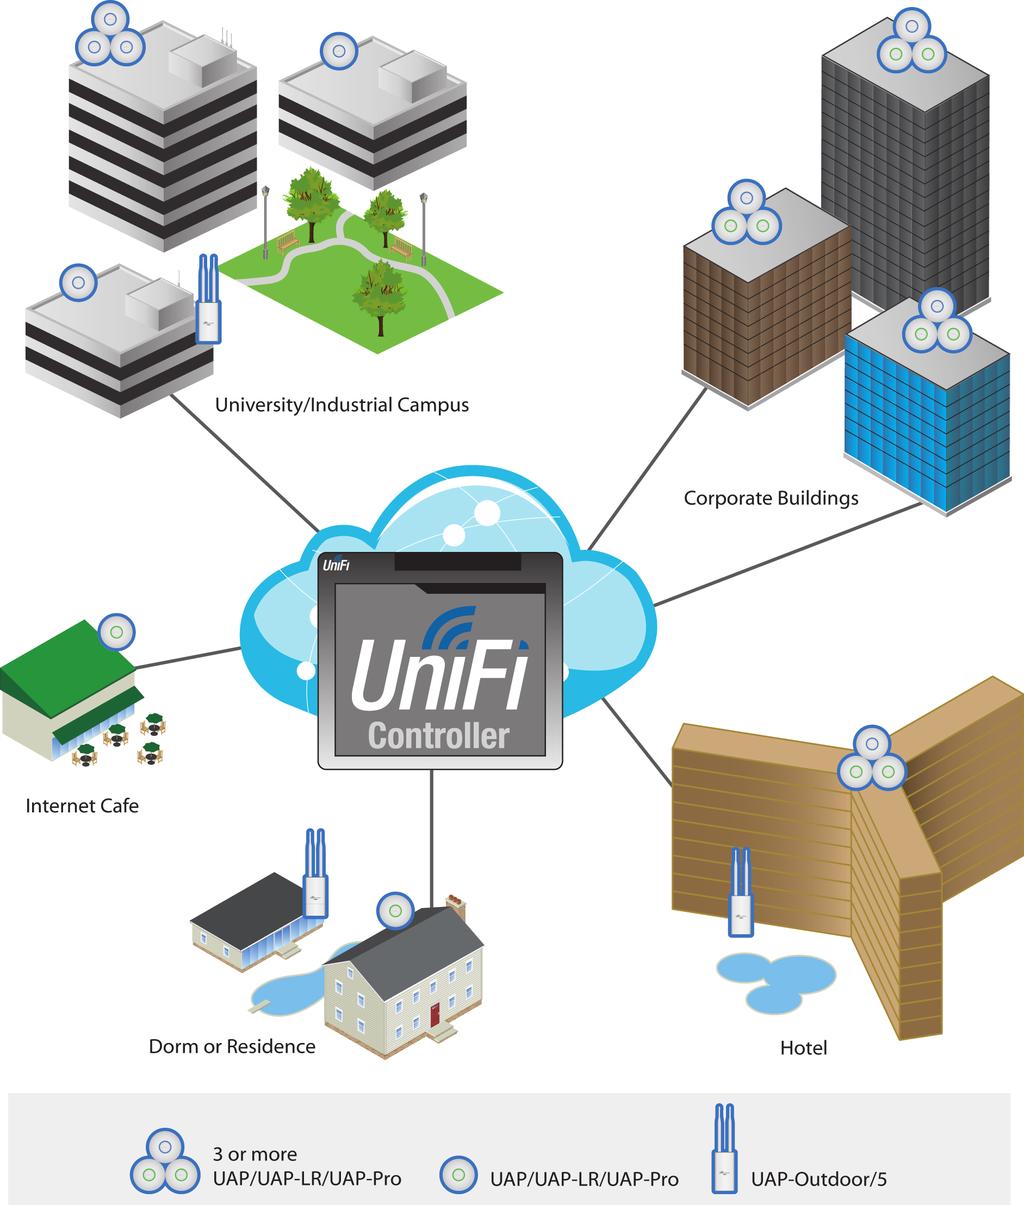 Extend Your Coverage With the UniFi Controller software running in a NOC or in the cloud, administrators can extend and centrally manage wide areas of indoor and outdoor coverage using any